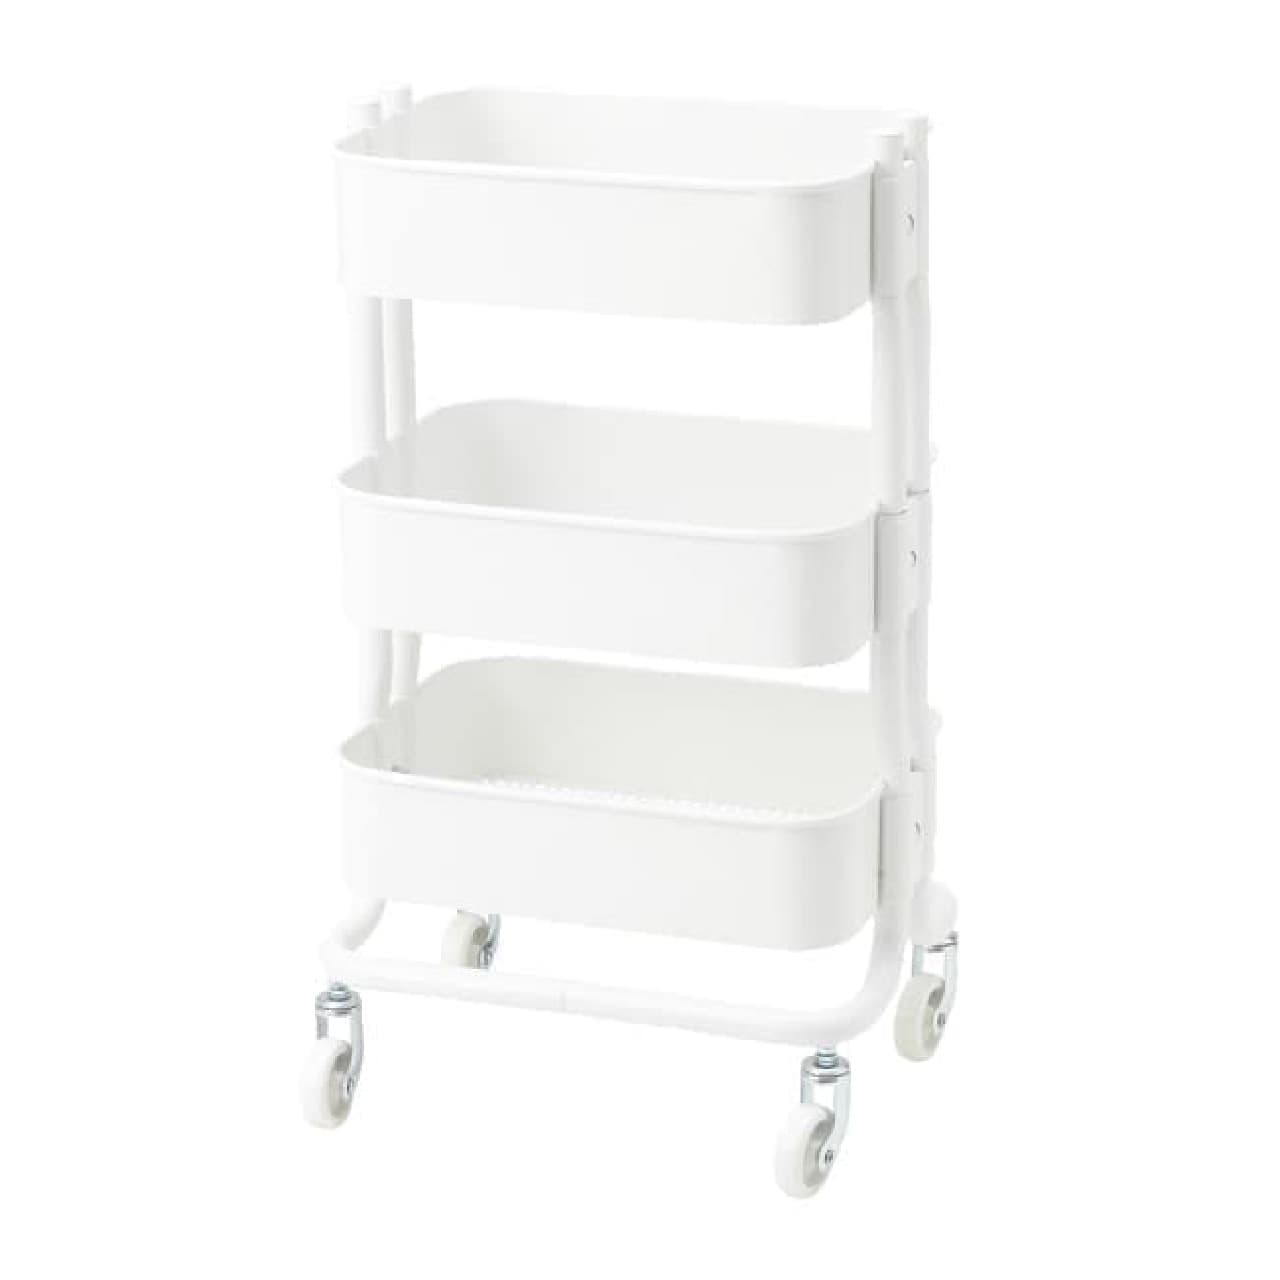 More than 200 IKEA product price cuts! Compact 3-tier wagon, bedside table, etc.